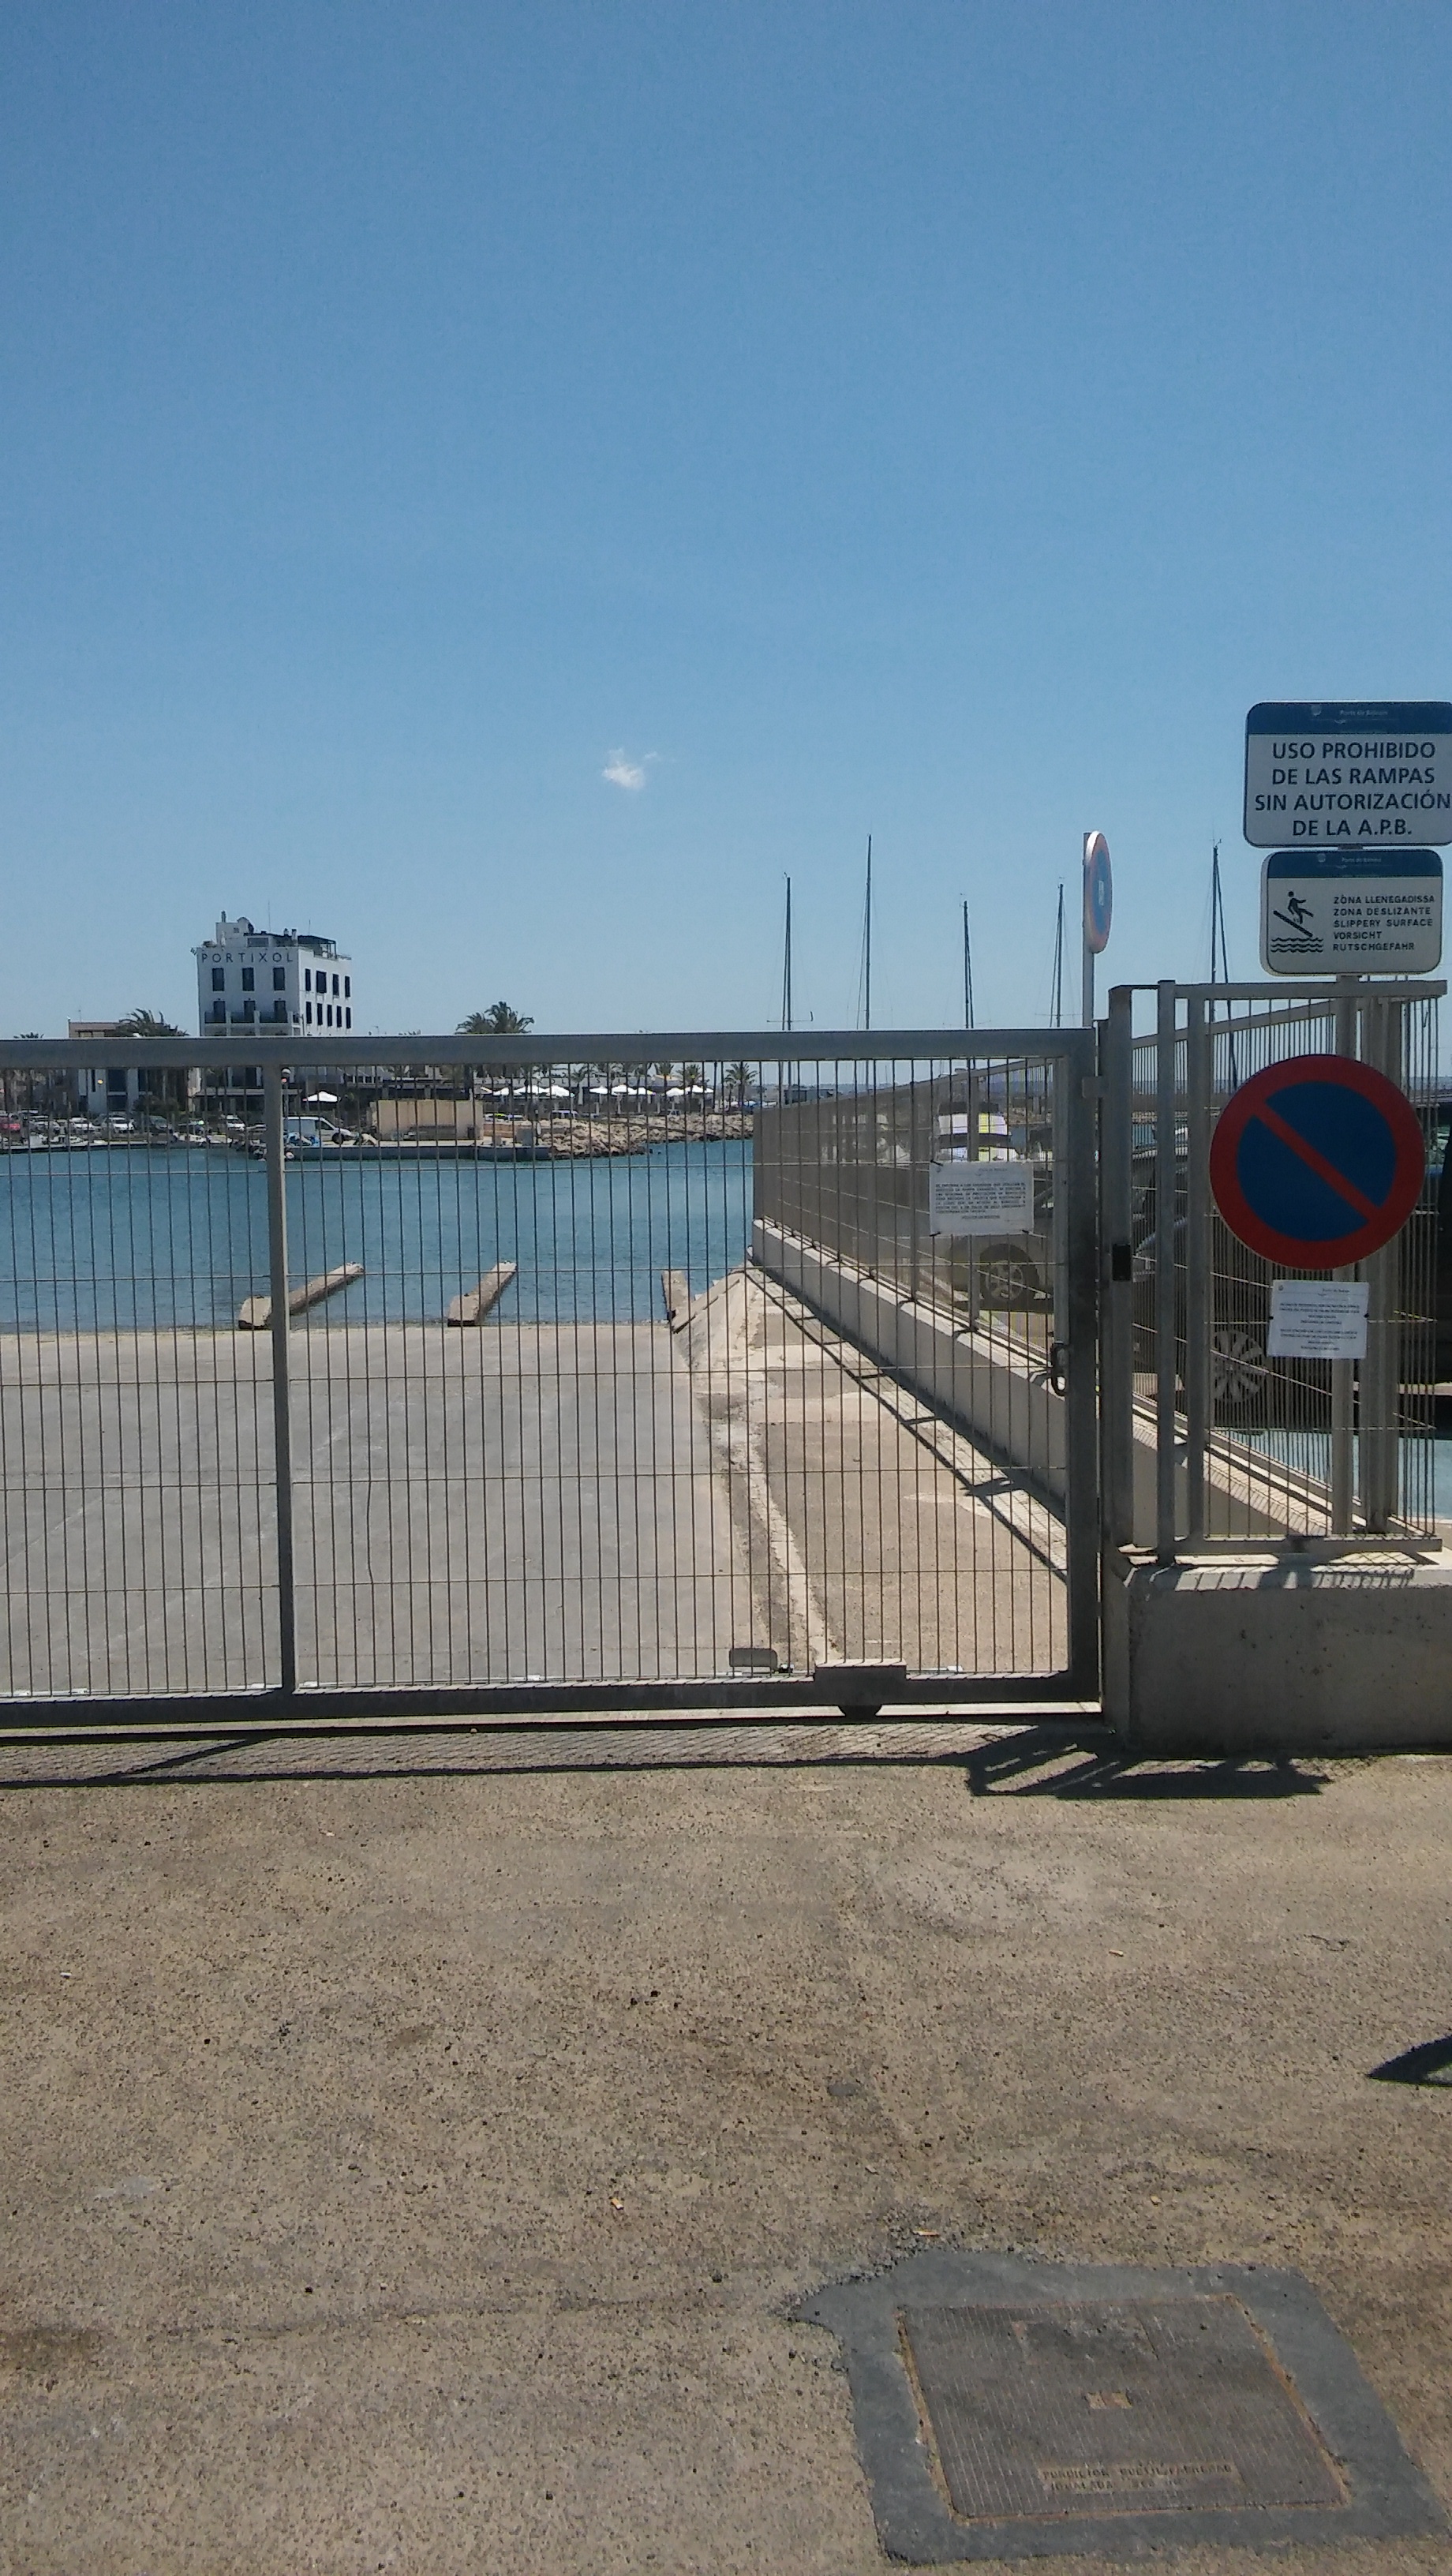 The APB modernises the system for accessing the dry dock ramps at the Port of Palma